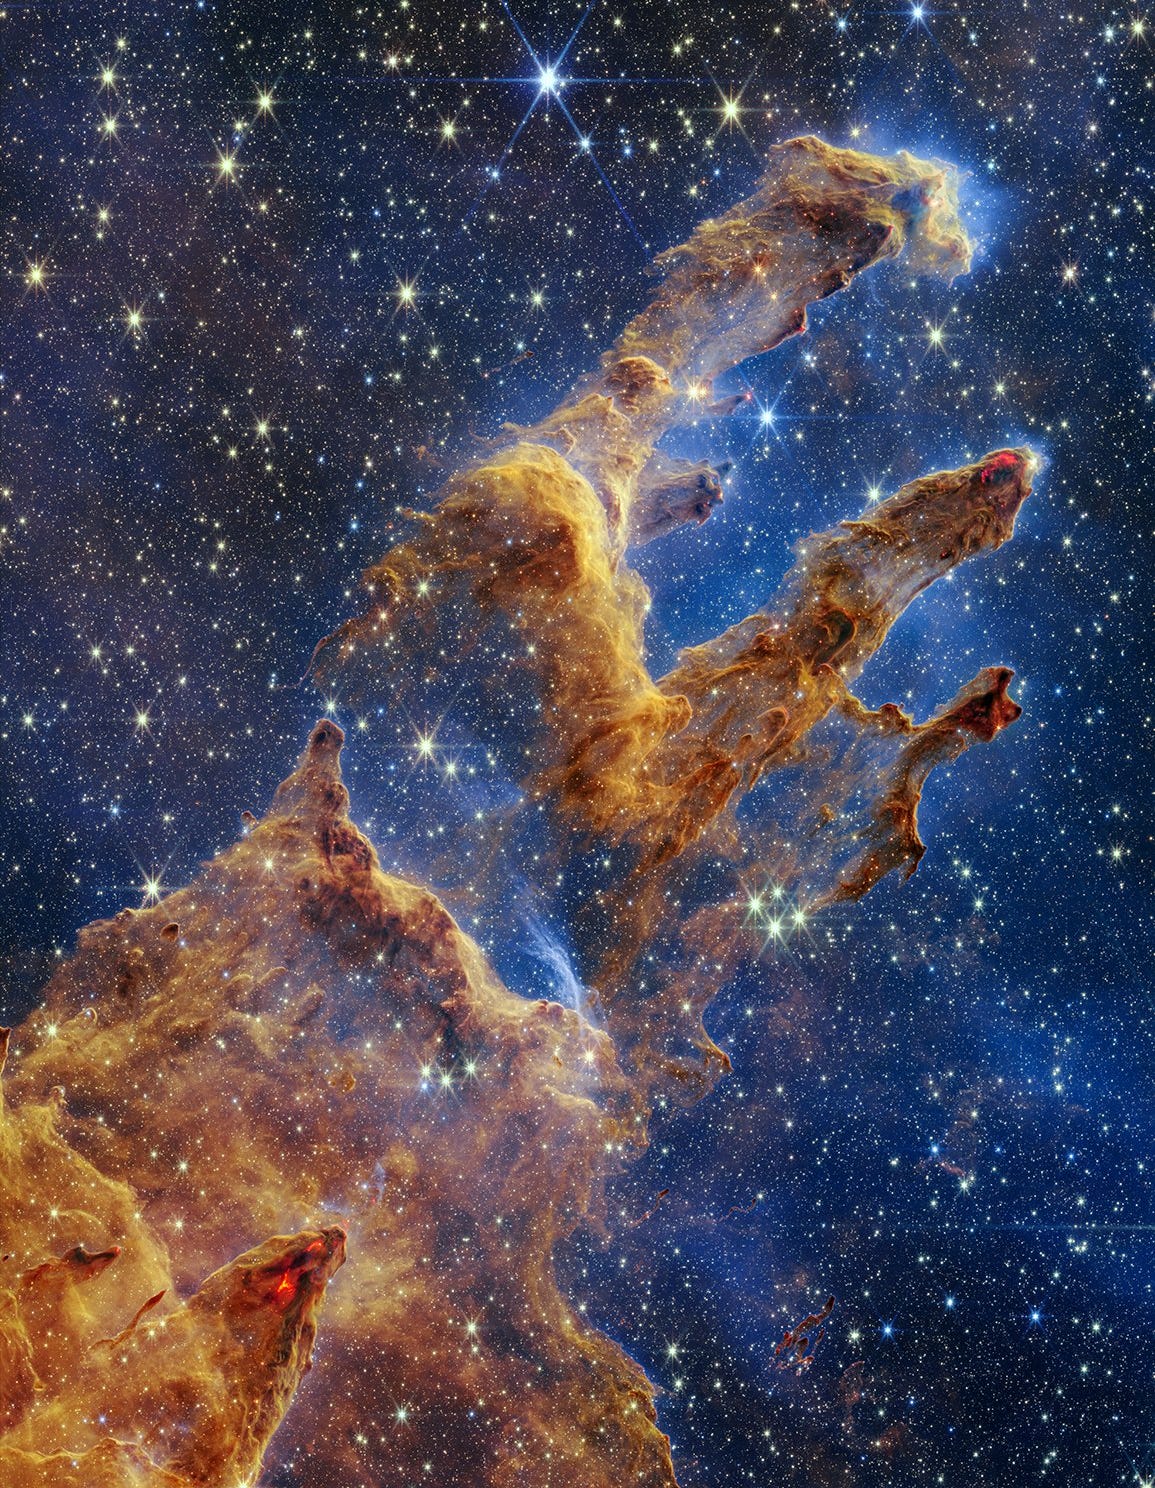 [inglise keeles] At the bottom left of this vertical image are the thickest regions of brown and rusty red gas and dust. There are many layers of semi-transparent gas and dust overlaying one another. A peak rises about a third of the way from the bottom, and becomes far darker brown with two bright red areas toward the tip. The light brown dust becomes more diaphanous about halfway up the screen. There’s a slight gap in the dust, which allows the blue background to come into view clearly. About 60% of the background in this image is set in shades of blue and littered with tiny yellow and blue stars. The brown pillars continue, taking the shape of a shoulder at the base, with three prominent columns rising out toward the upper right. The top left pillar is the largest and widest. The peaks of the second and third pillars are set off in darker shades of brown and have red outlines.